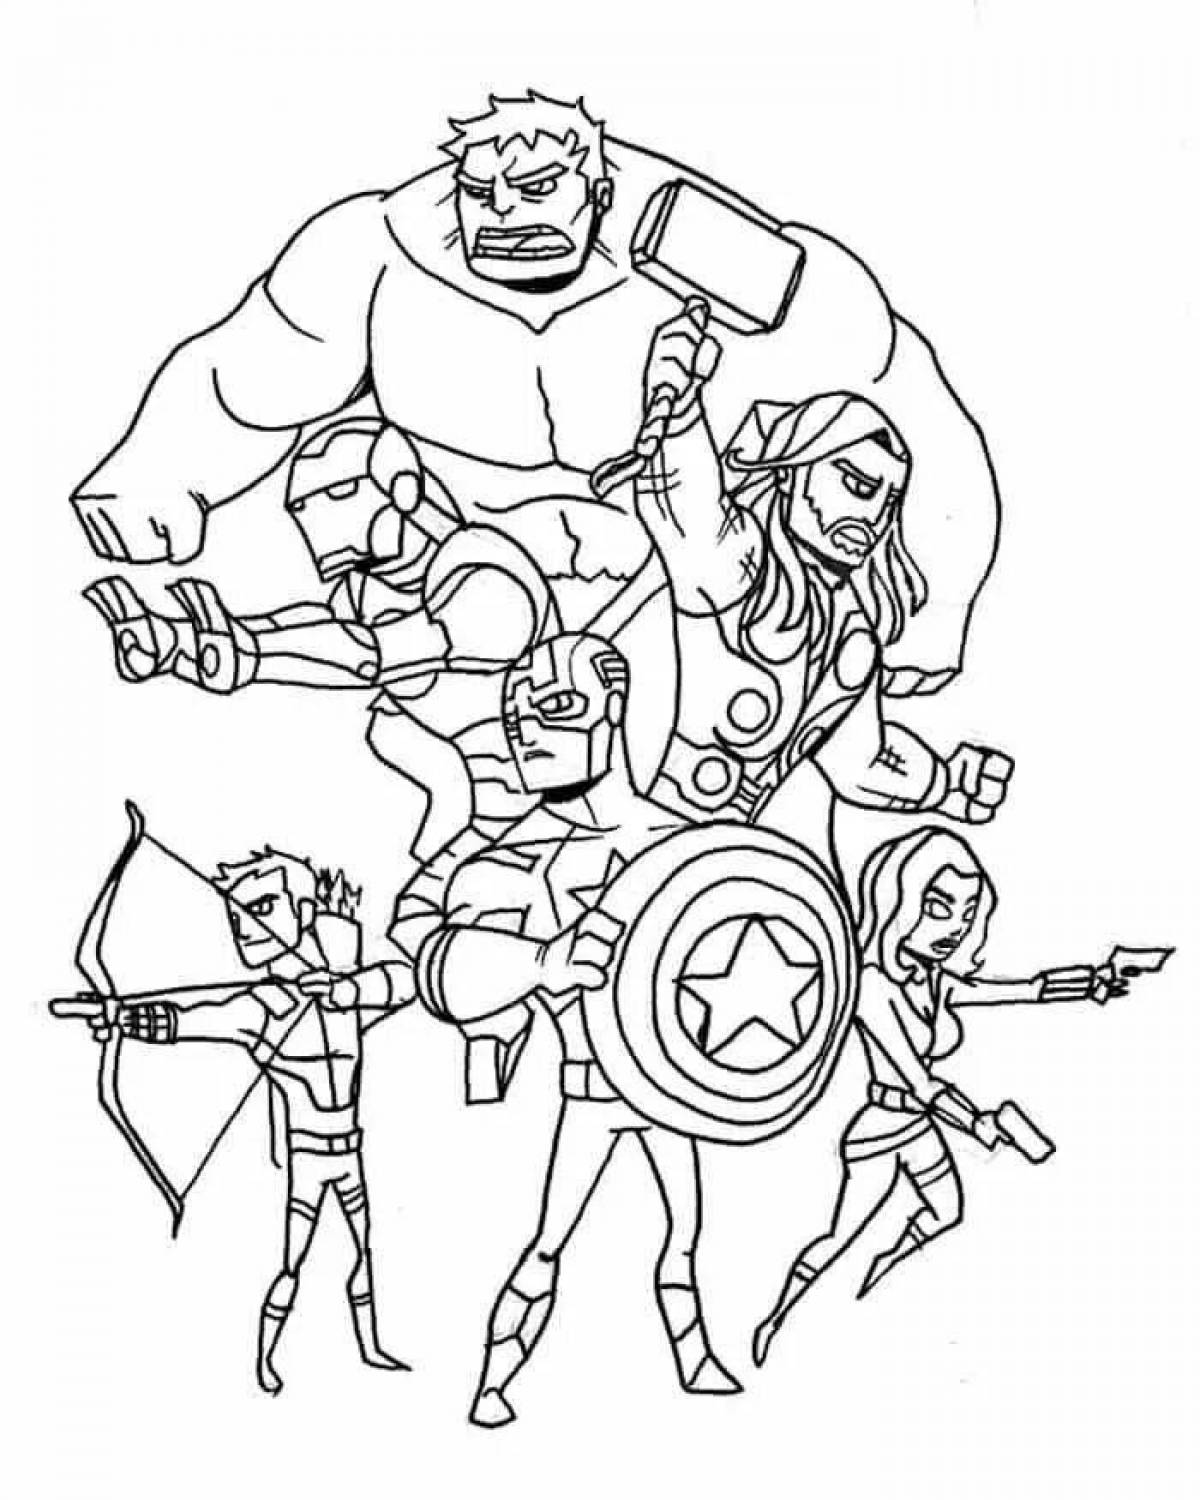 Marvel avengers coloring pages